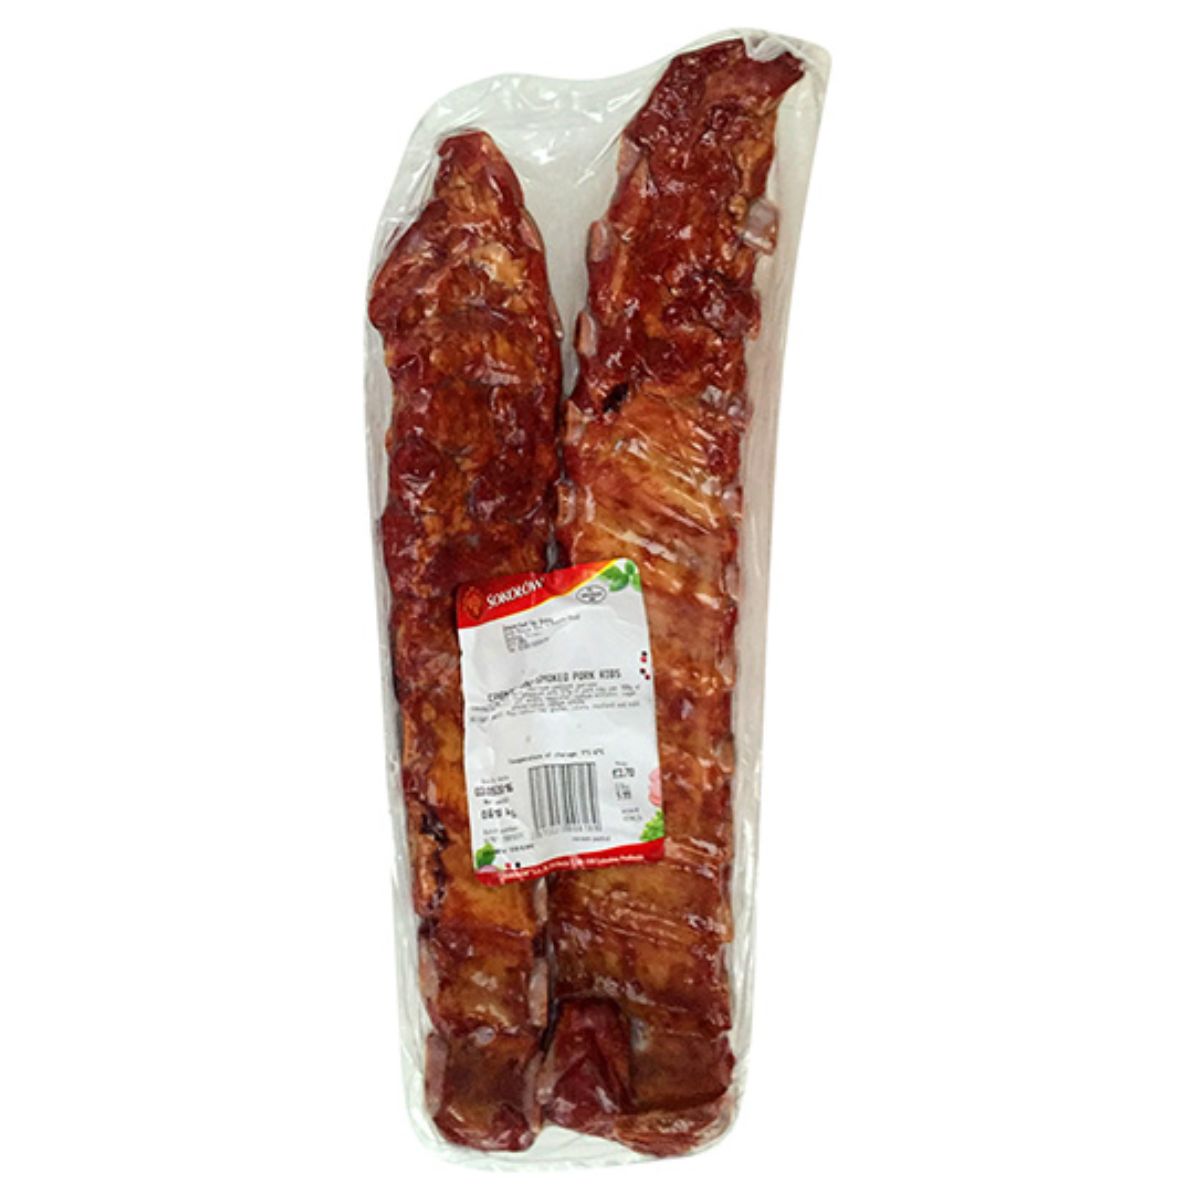 Sentence with Product Name: Sokolow - Smoked Pork Ribs - 2.5kg (Varies) in a package on a white background.